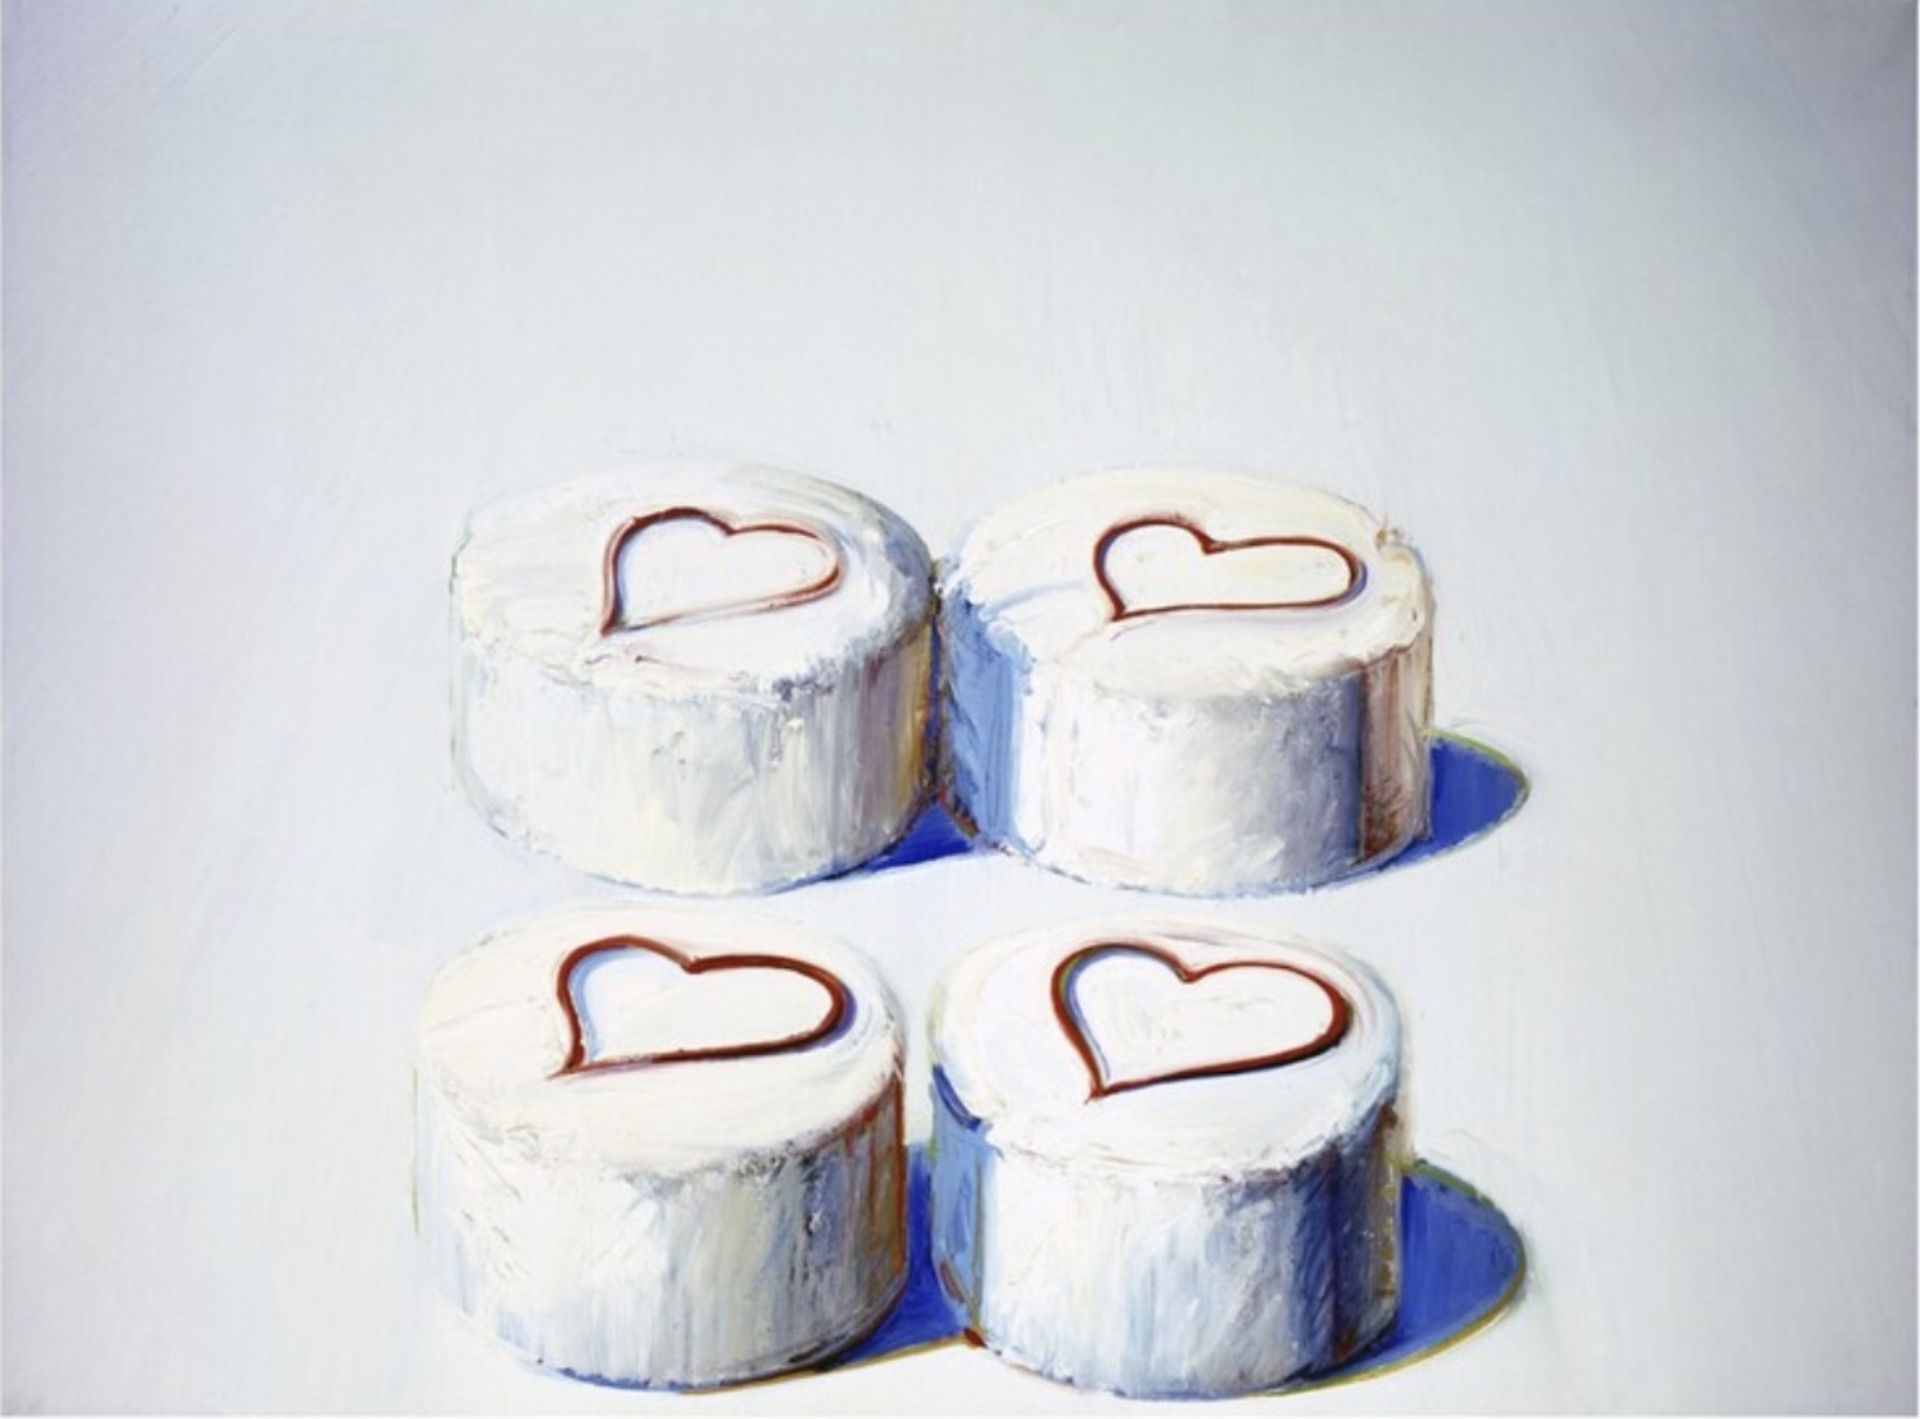 Wayne Thiebaud "Heart Cakes, 1975" Offset Lithograph